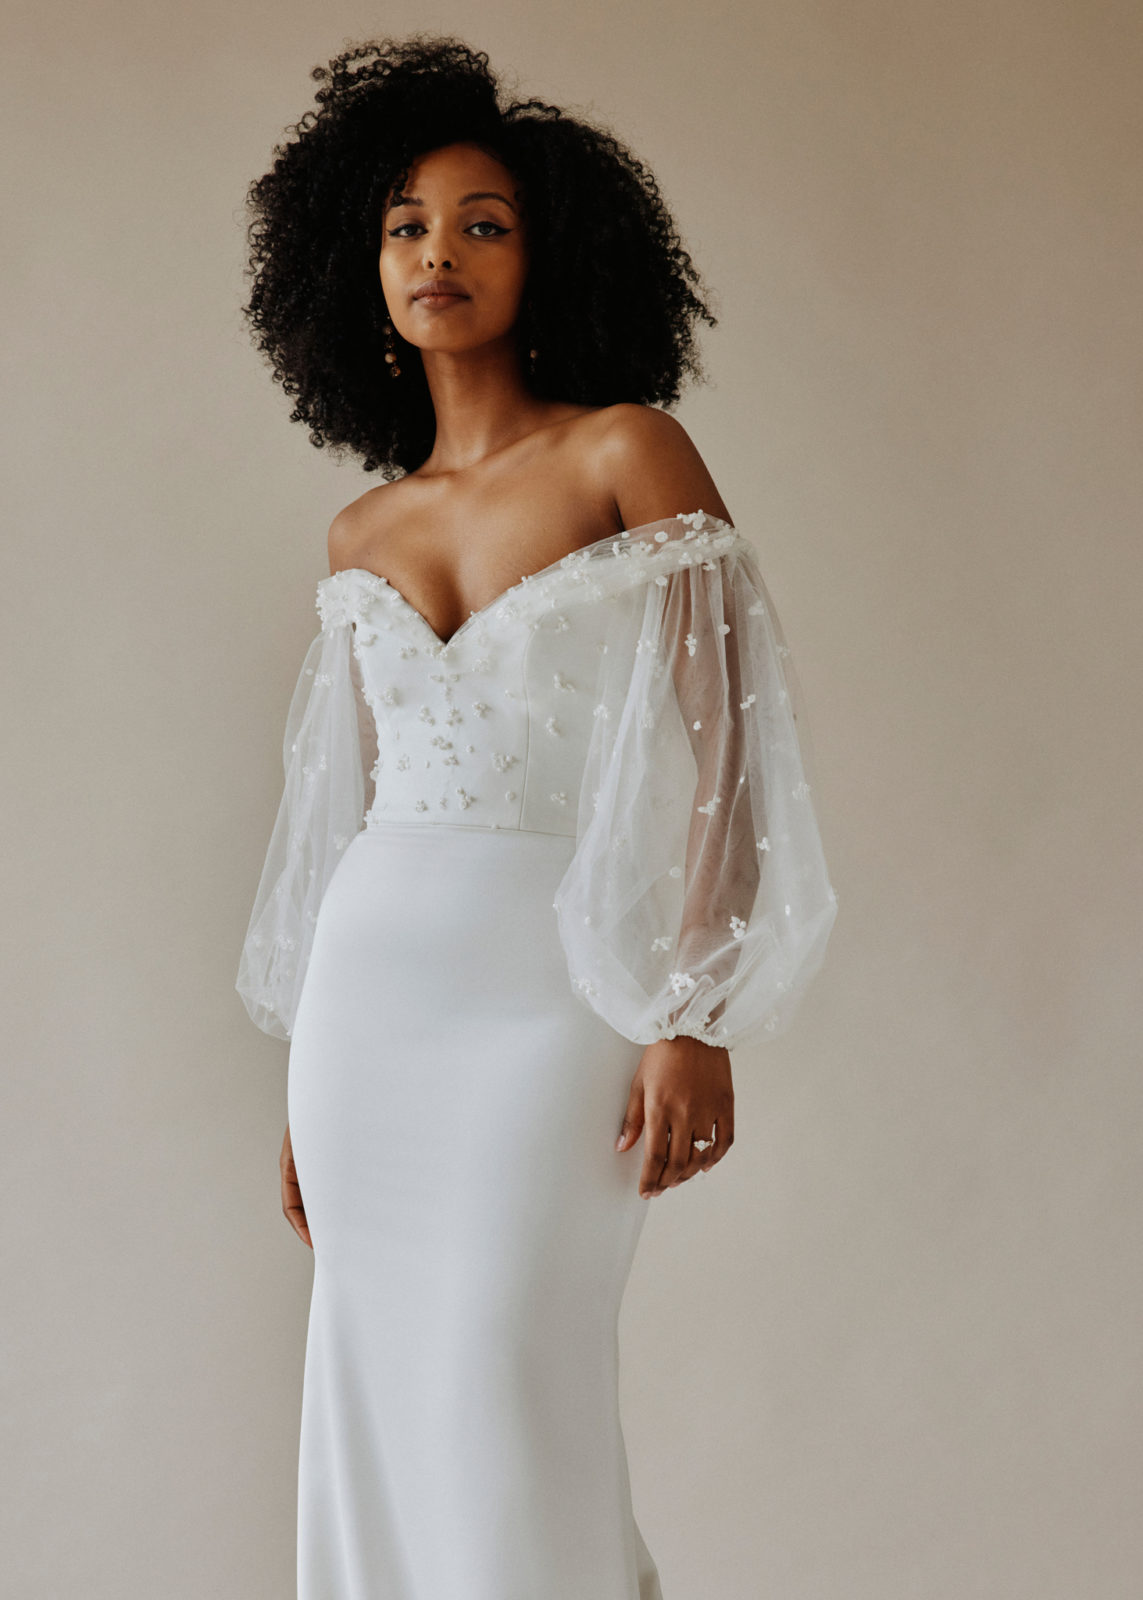 Gorgeous bridal inspiration from Canadian designer Laudae